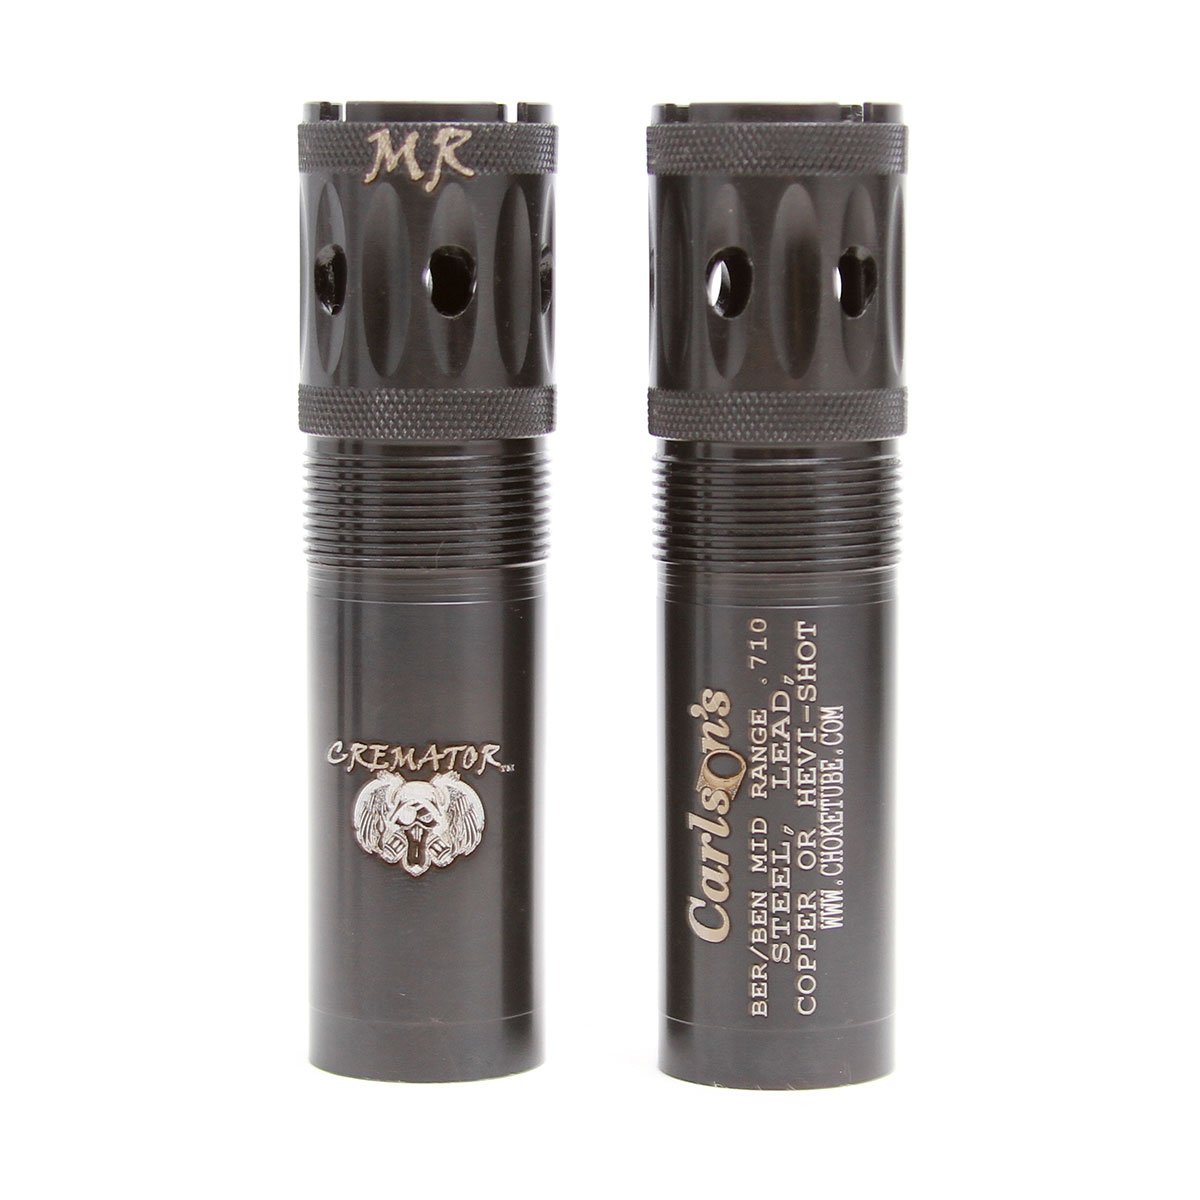 CARLSON'S - CREMATOR PORTED WATERFOWL CHOKE TUBES FOR BERETTA/BENELLI MOBIL